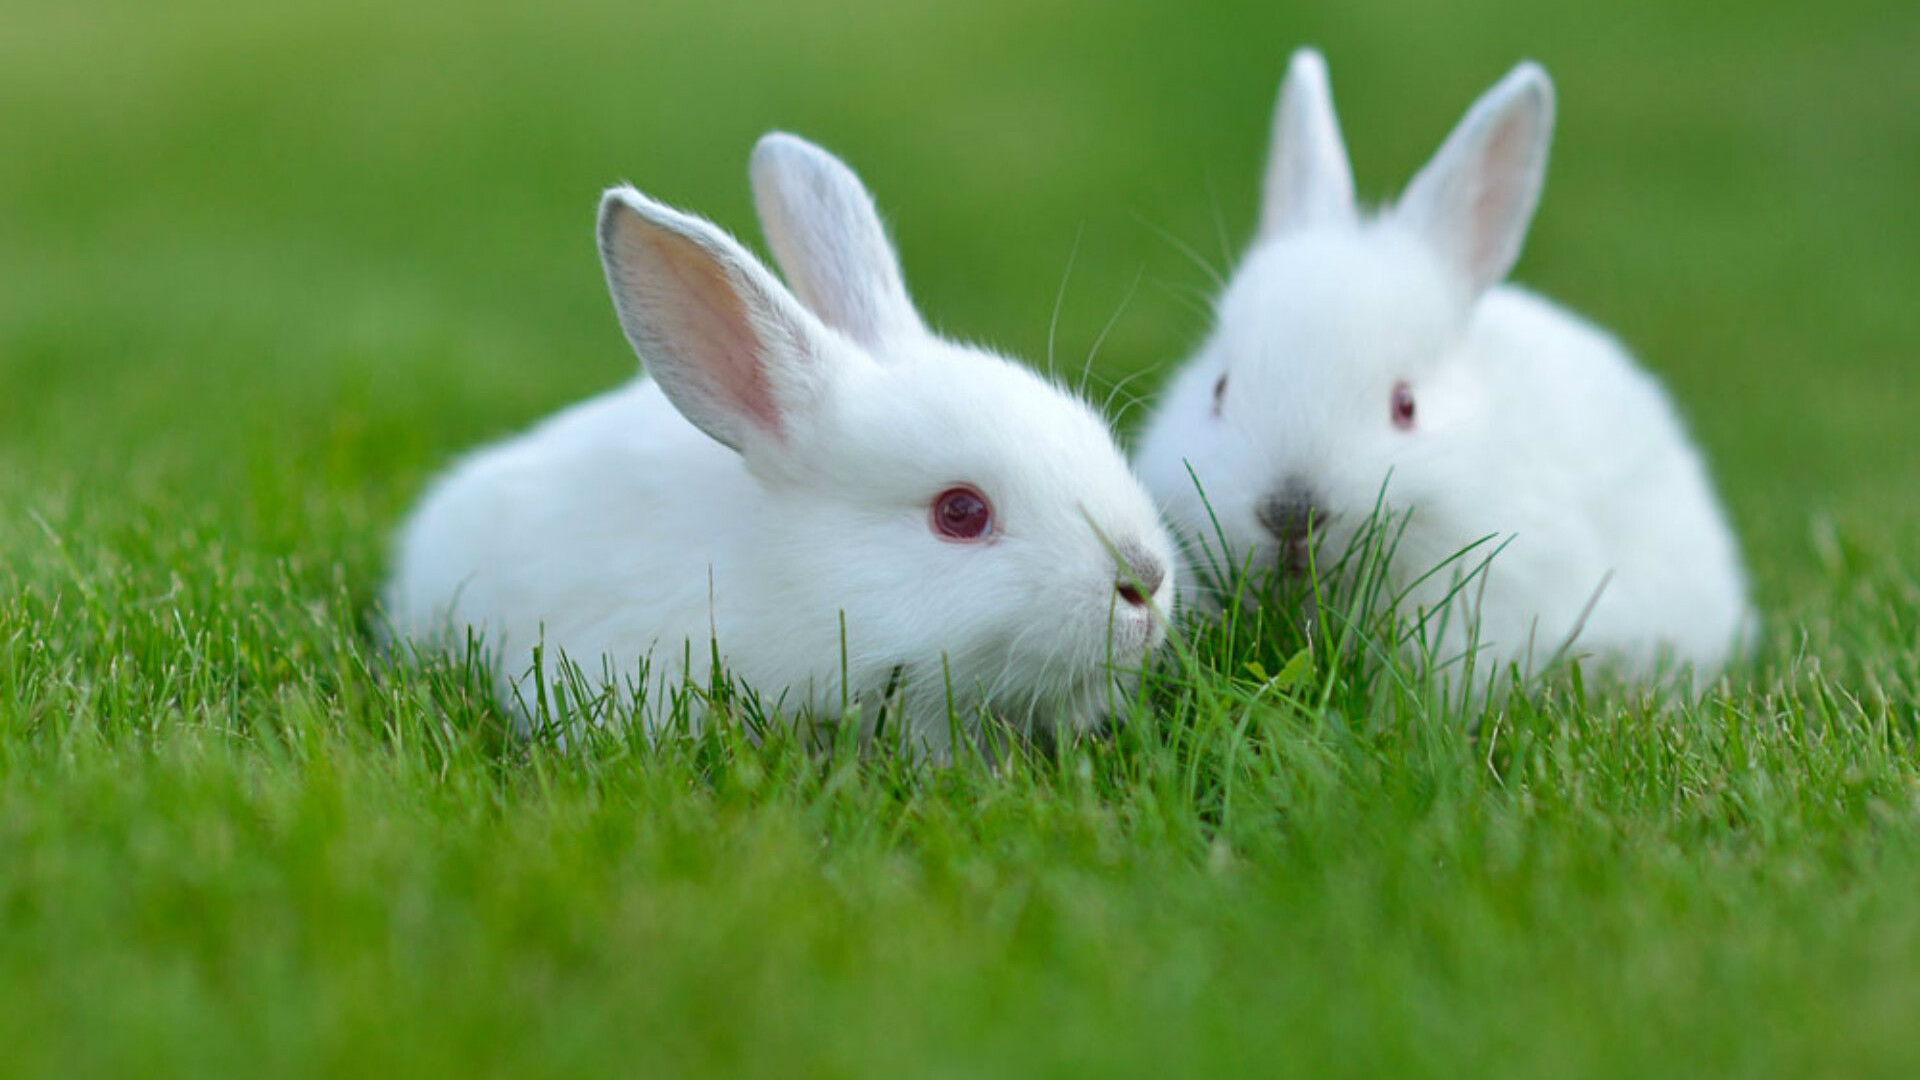 Rabbit: Small mammals in the family Leporidae, Bunnies. 1920x1080 Full HD Background.